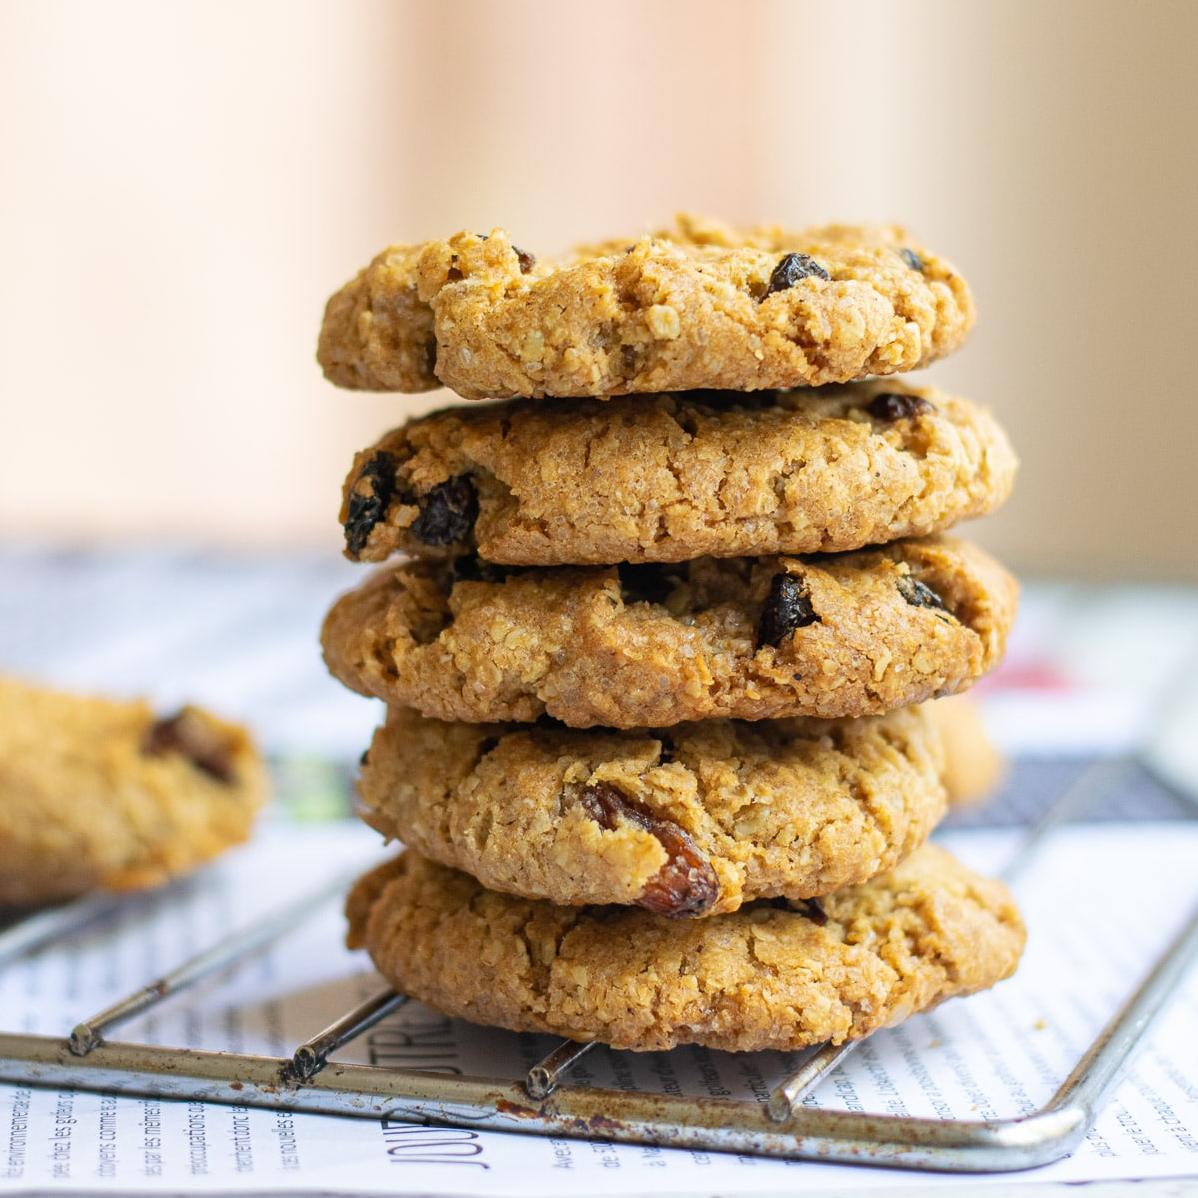  Each bite of these oatmeal raisin cookies is packed with warm spices and juicy raisins.